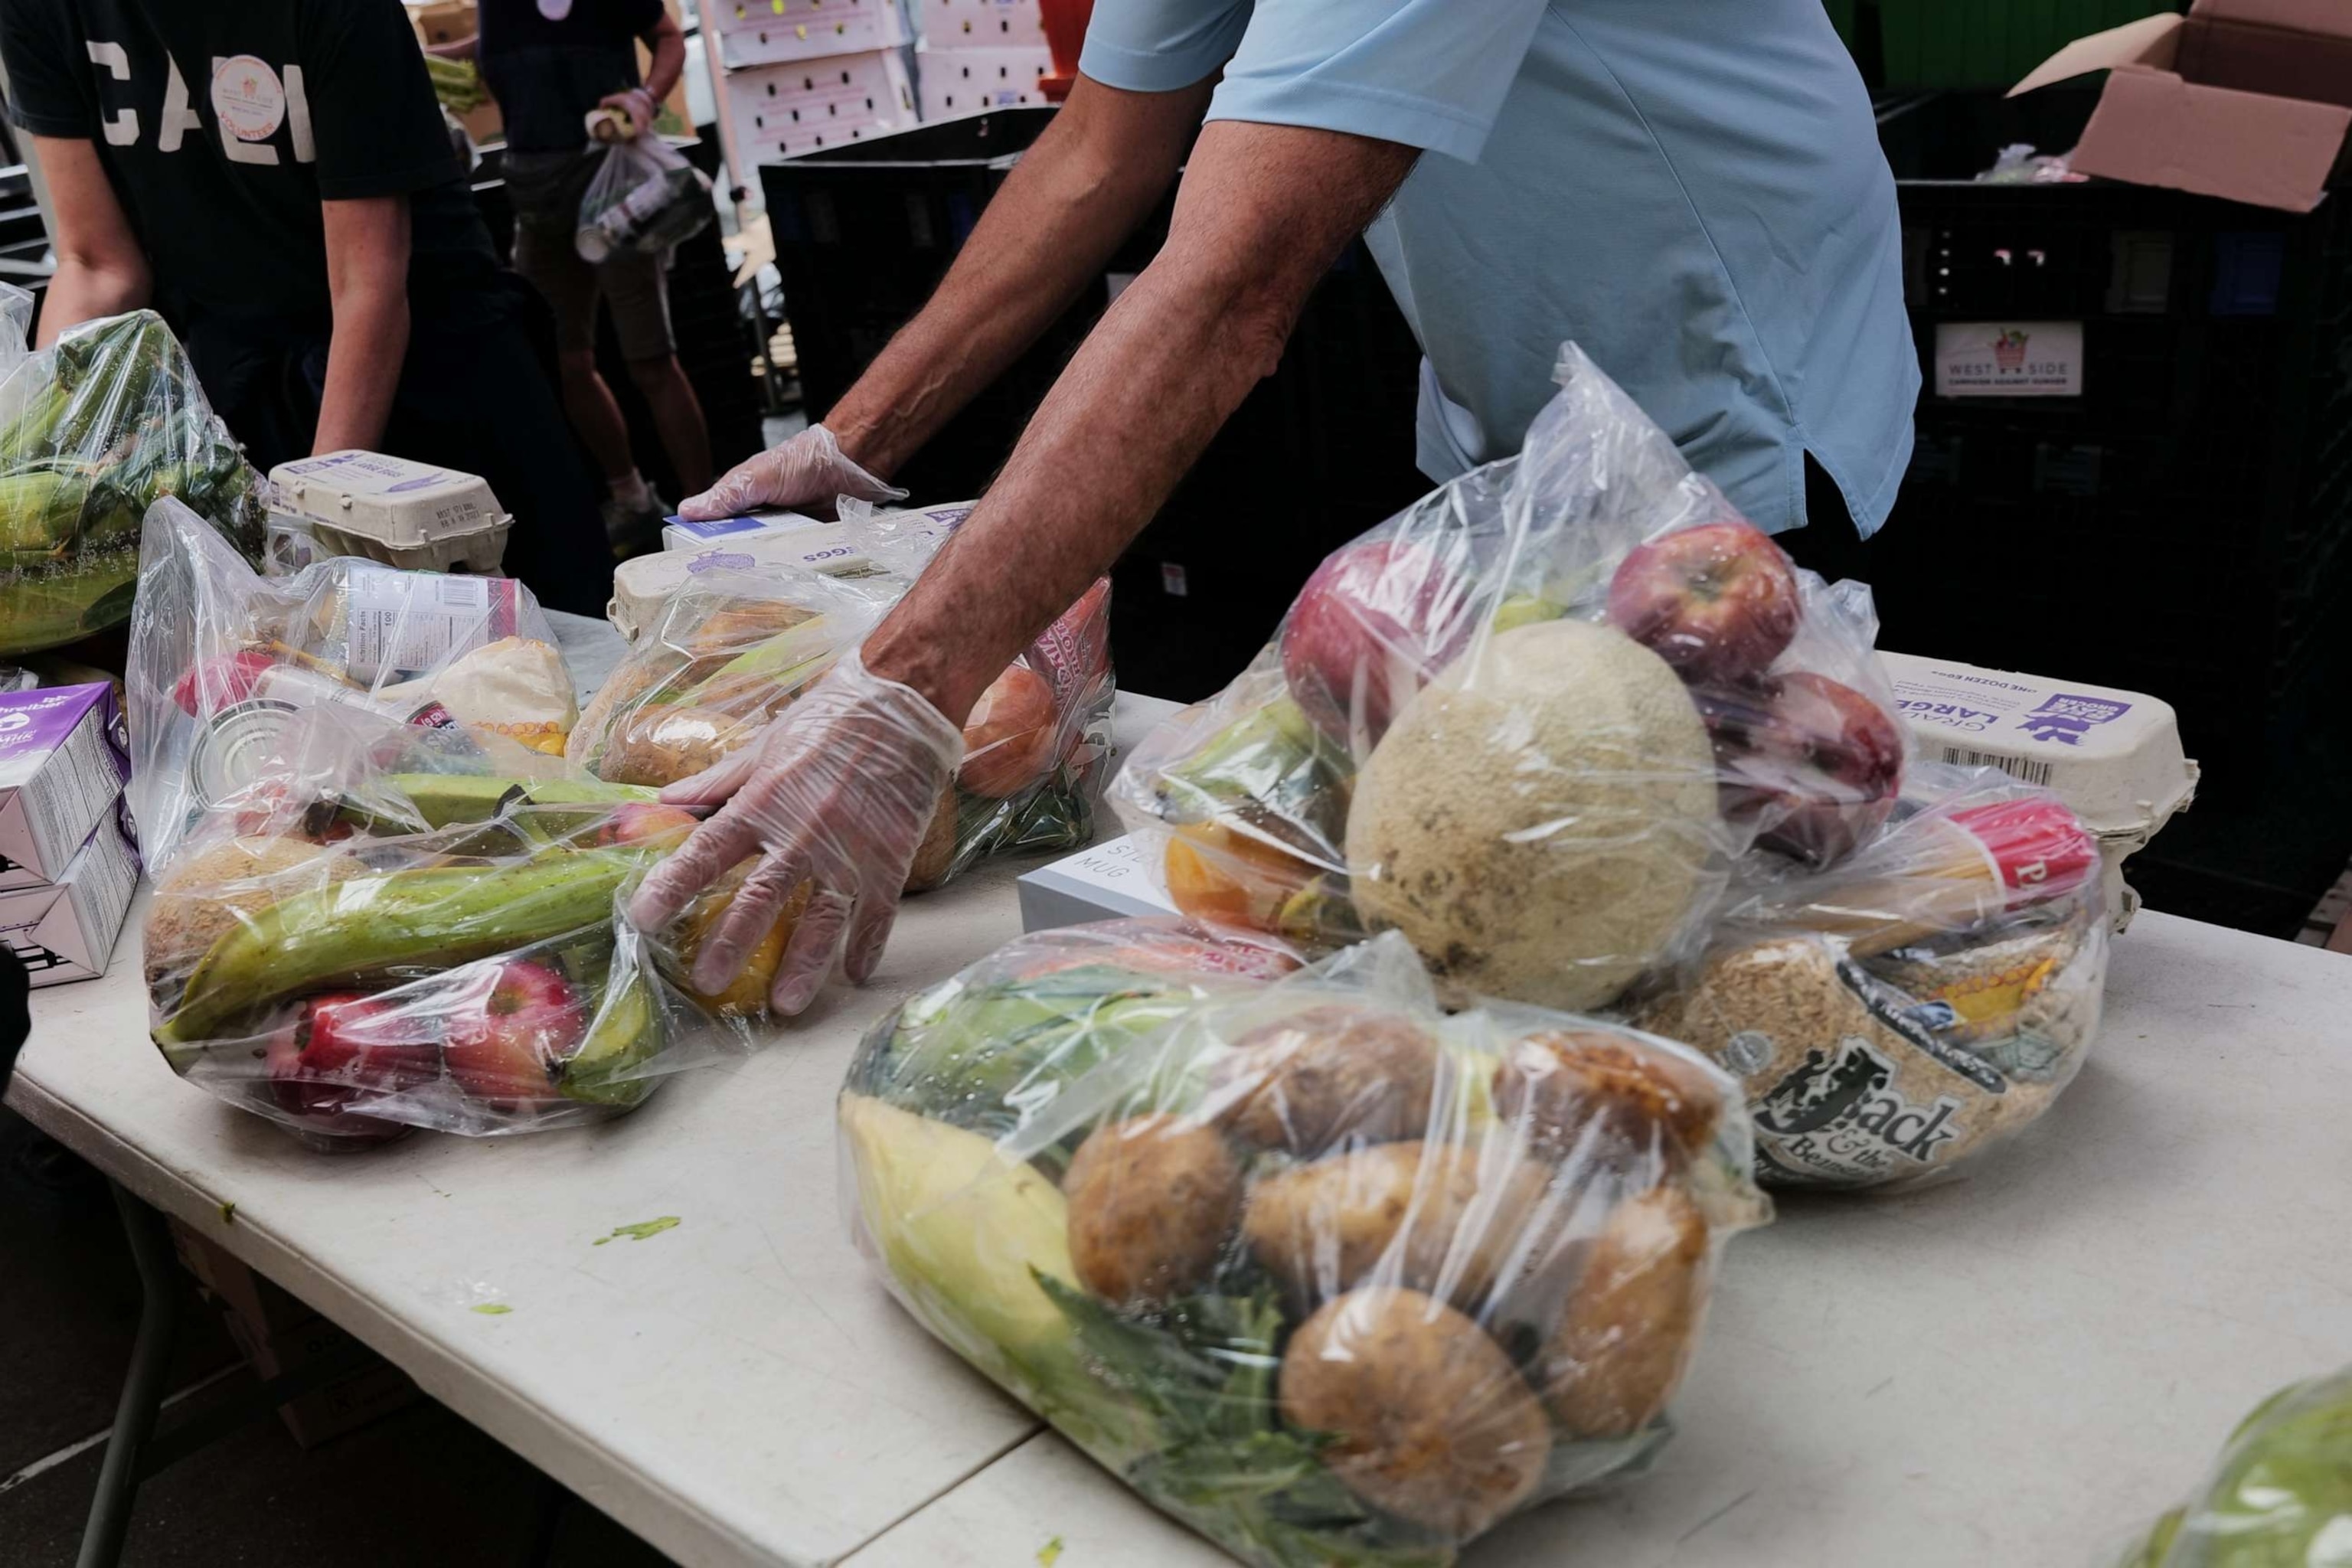 PHOTO: Volunteers and employees with West Side Campaign Against Hunger (WSCAH) distribute food to those in need outside of their Manhattan facility on Aug. 17, 2023 in New York City.